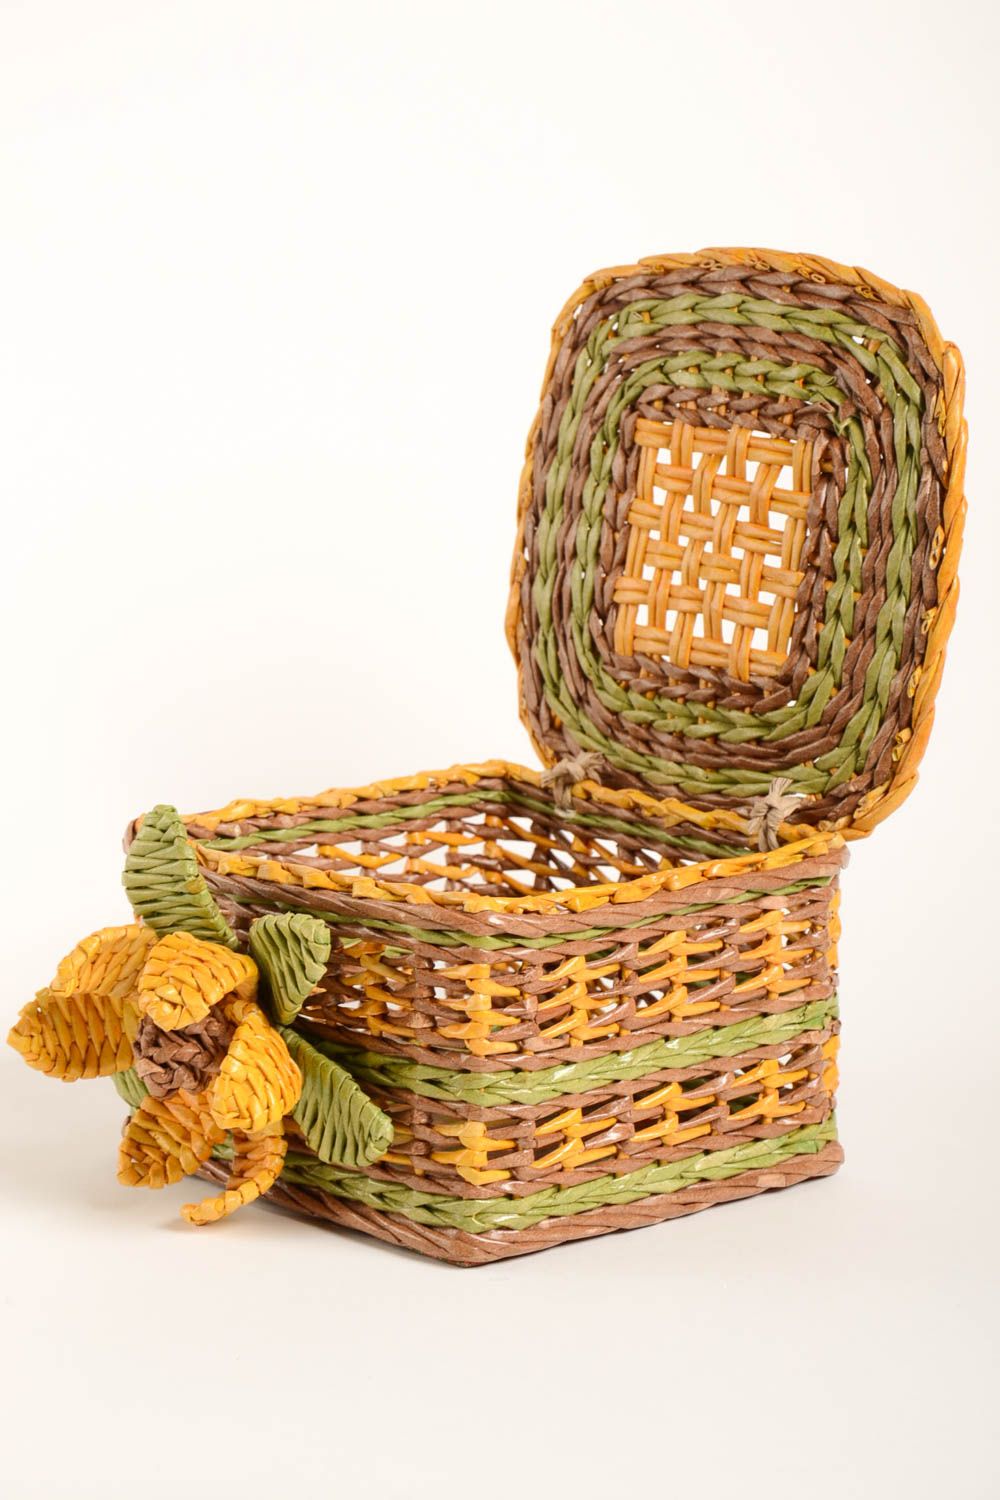 Stylish handmade woven bread basket cute unusual home accessories lovely decor photo 3